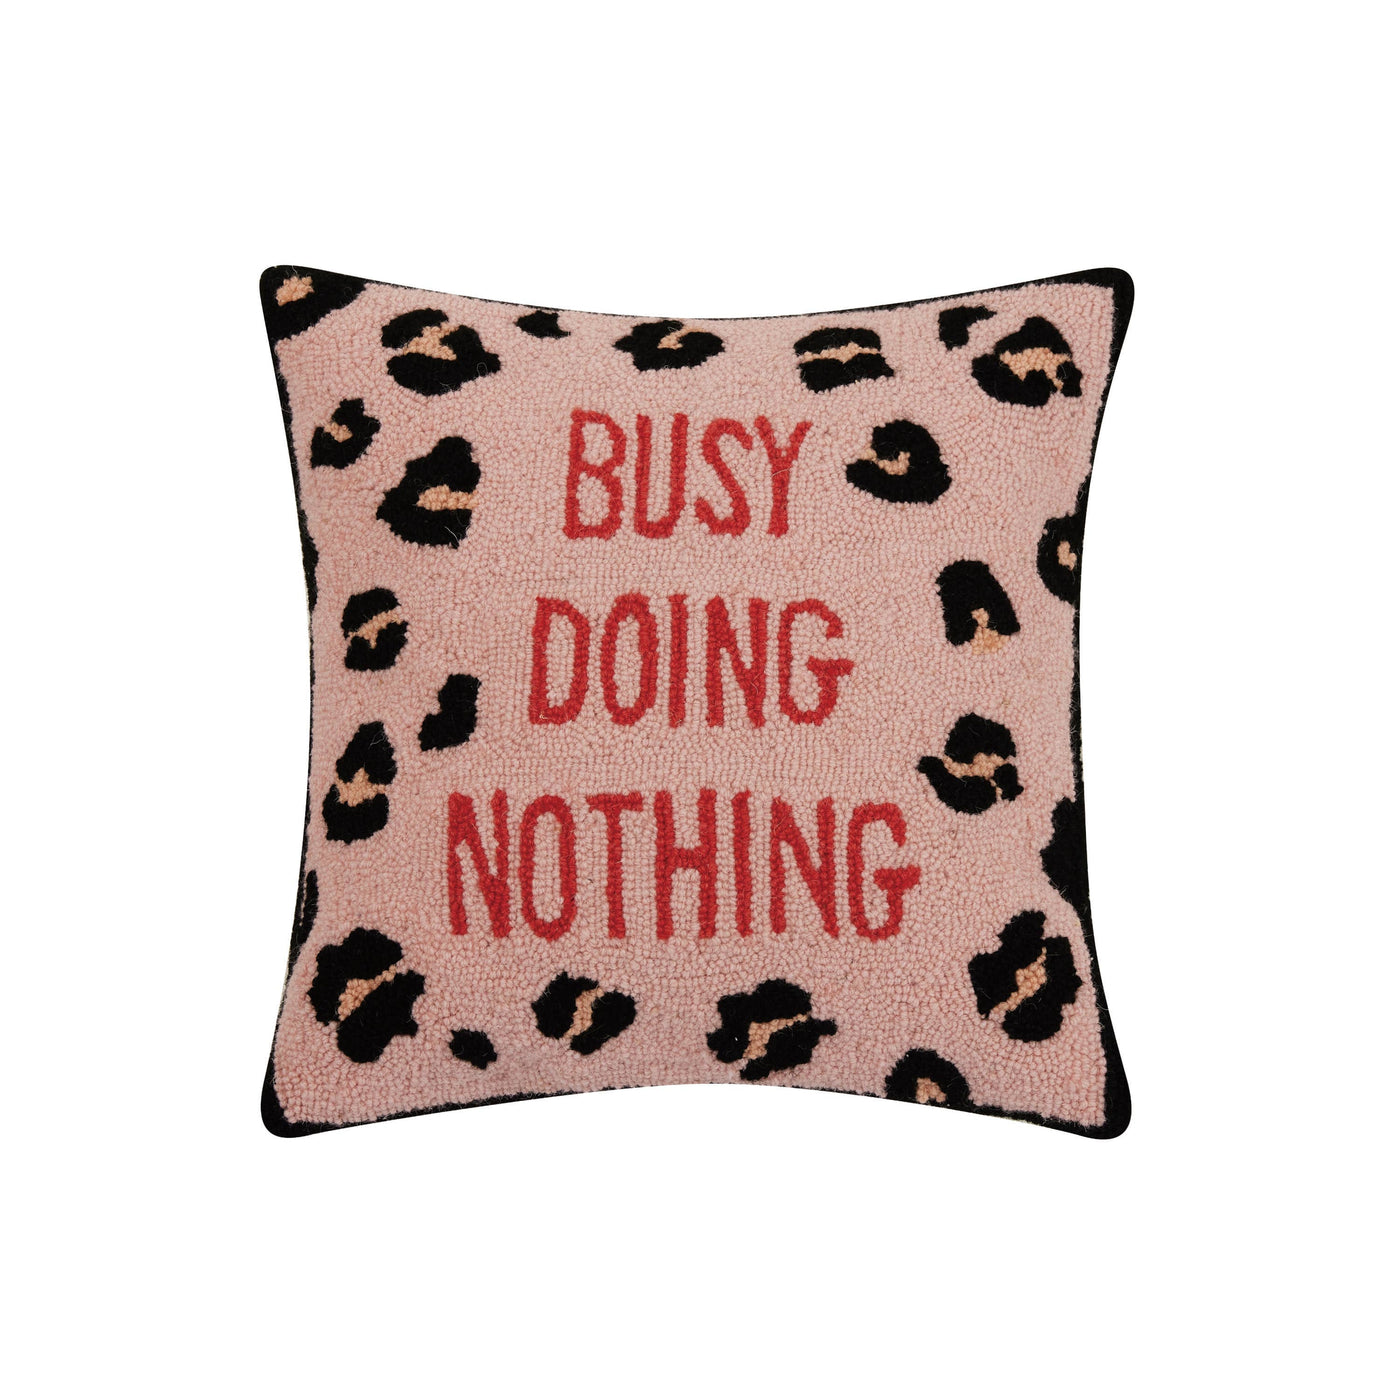 Busy Doing Nothing Hook Pillow